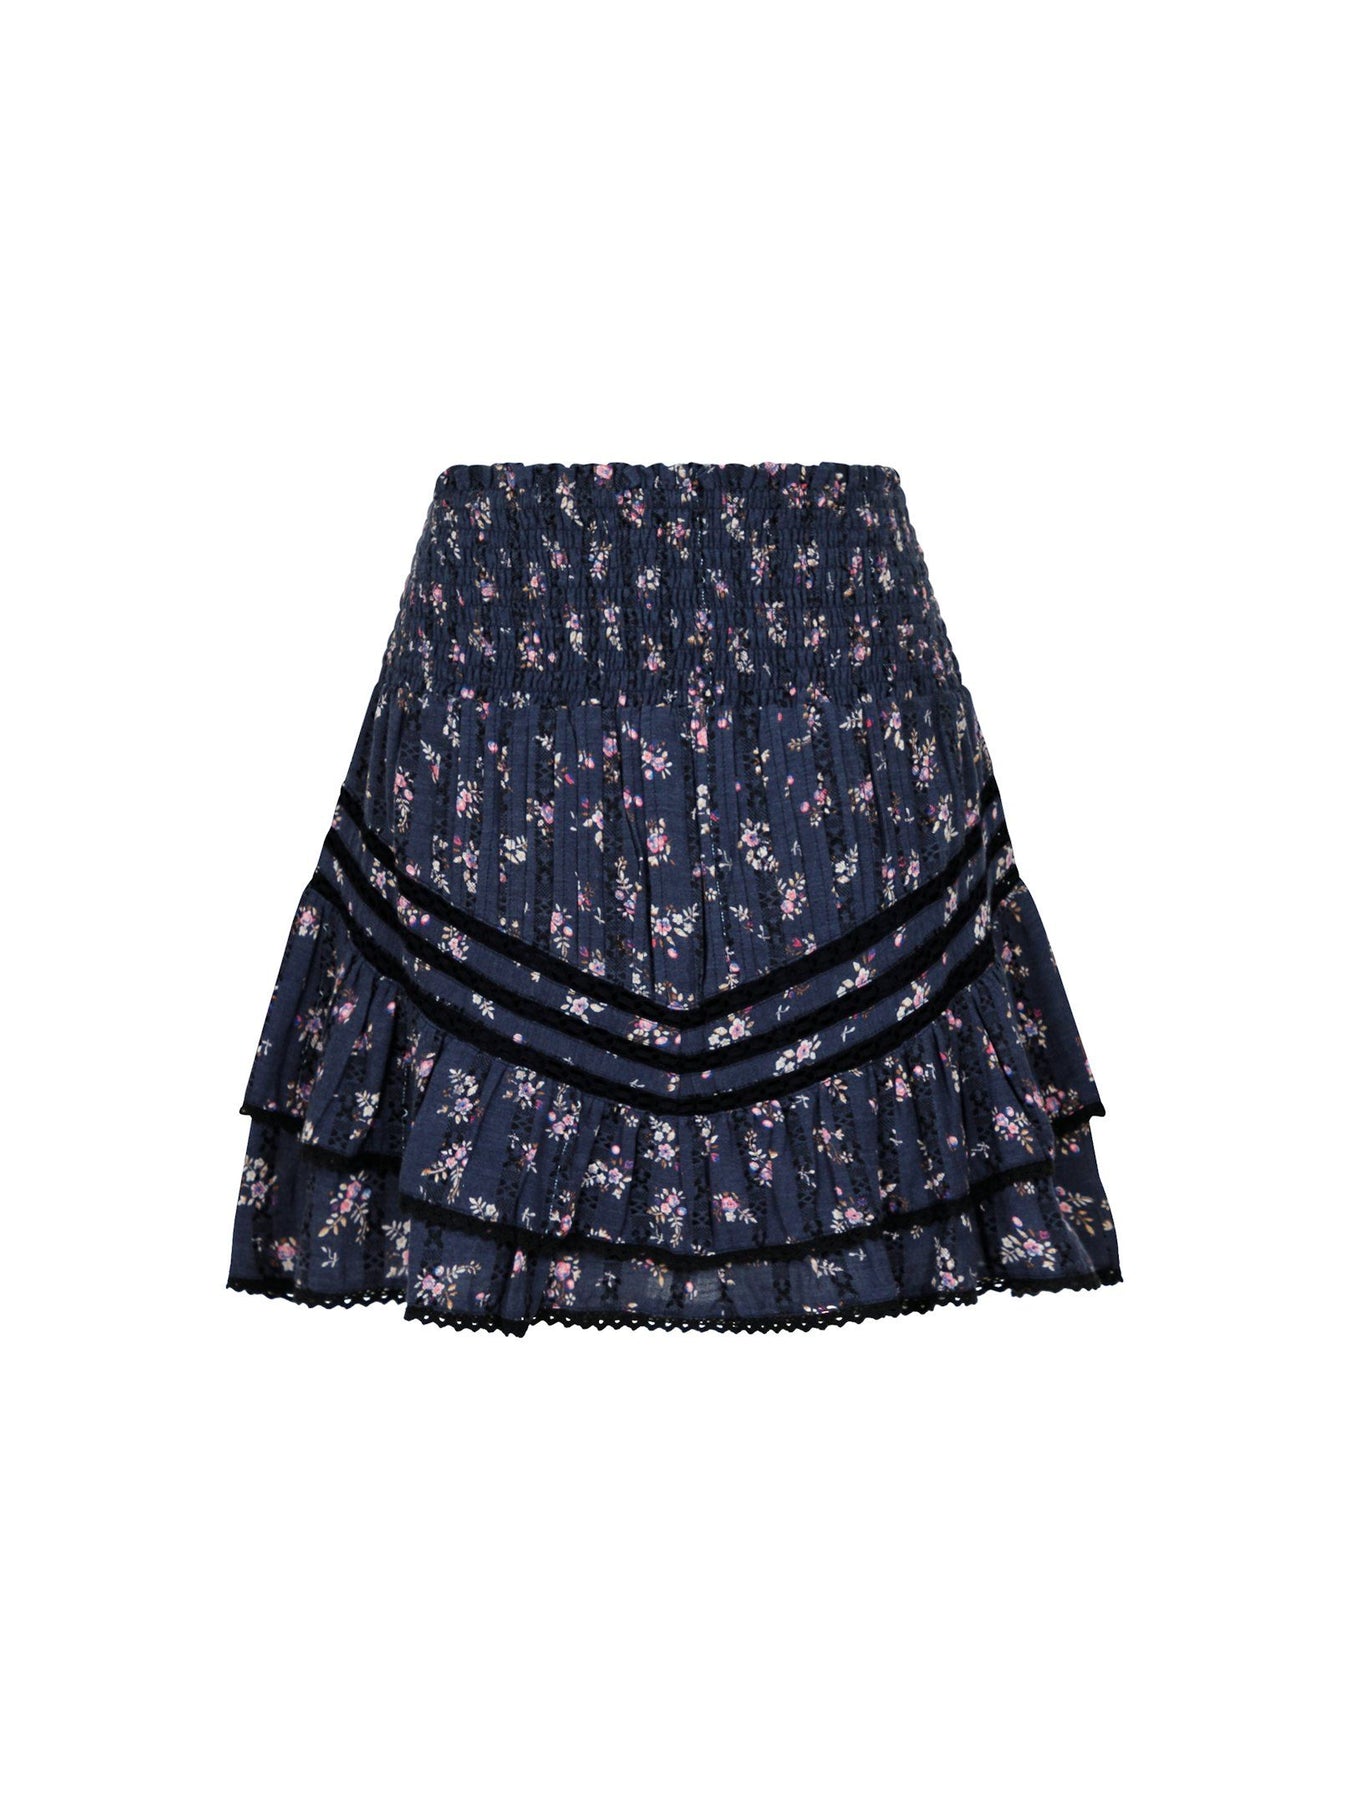 Atkin Delicate Floral Skirt - Dusty Navy